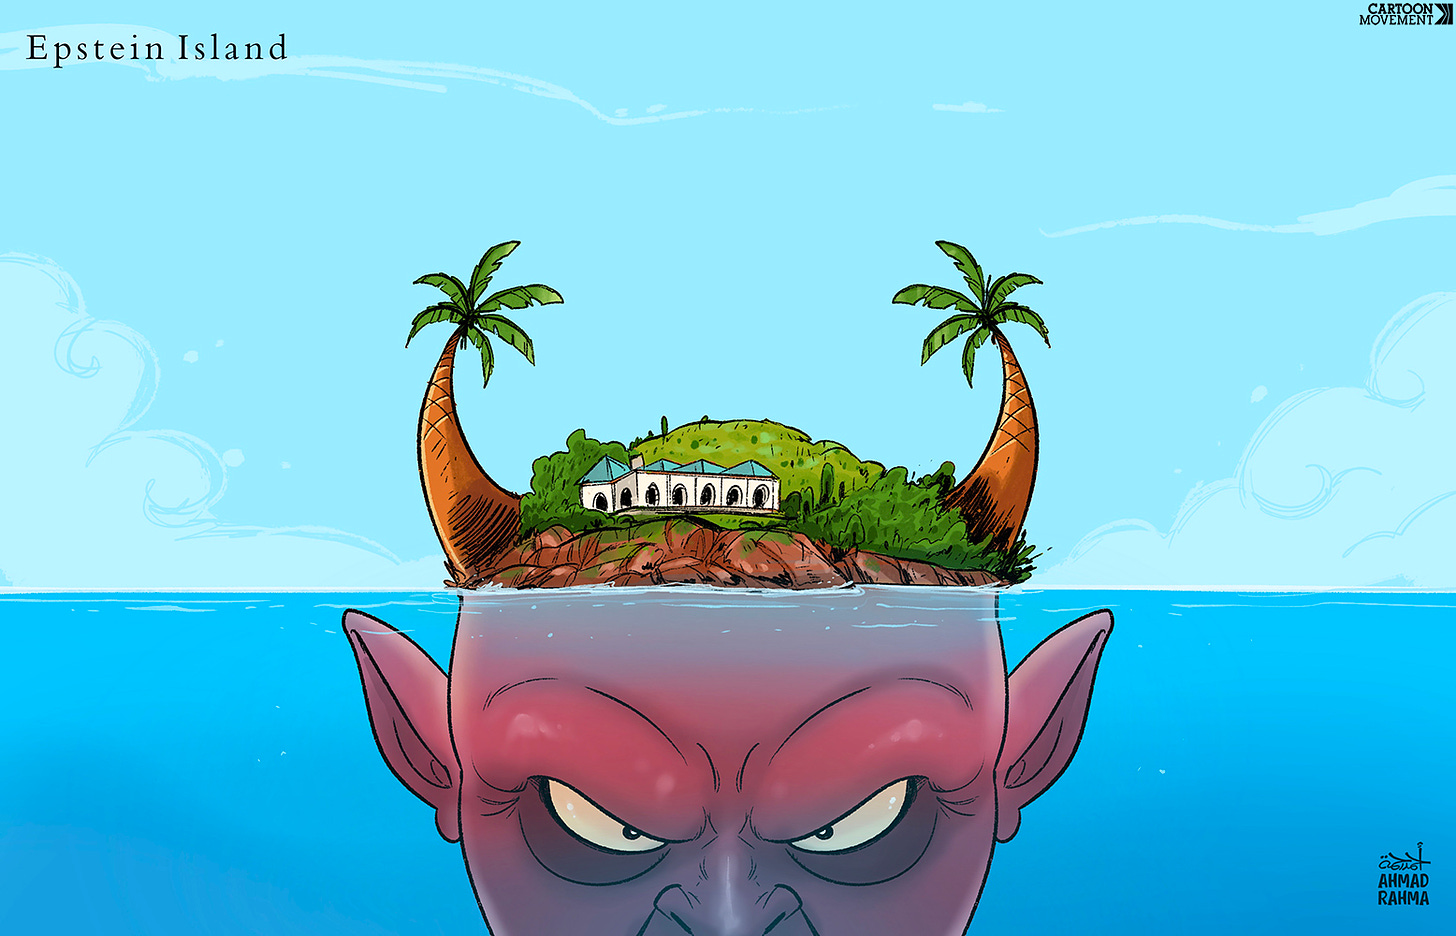 Cartoon showing an island with the part beneath the surface forming a devil's face, while two palm trees at the top are shaped like the devil's horns. The caption read's 'Epstein island'.